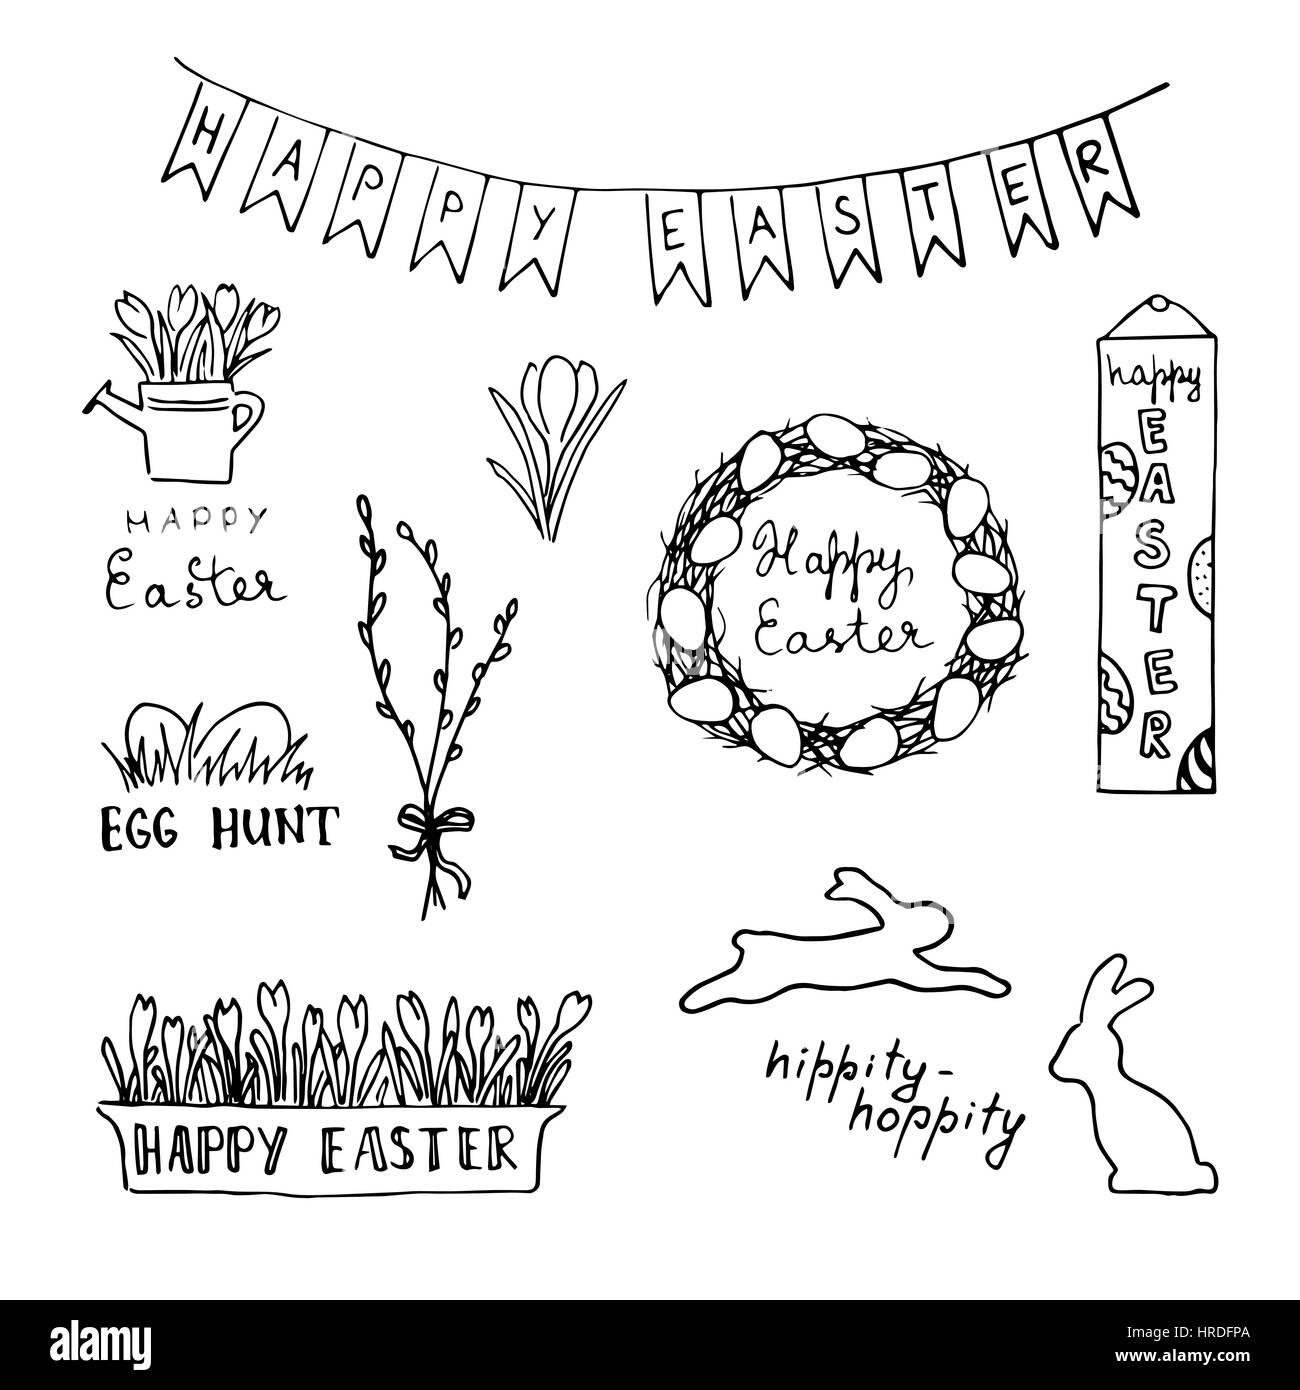 Happy easter card with eggs, rabbits, flowers, lettering, wreath. Typographical. sketch. Hand drawn. Brush pen. Garland, spring theme. Floral ornament Stock Vector